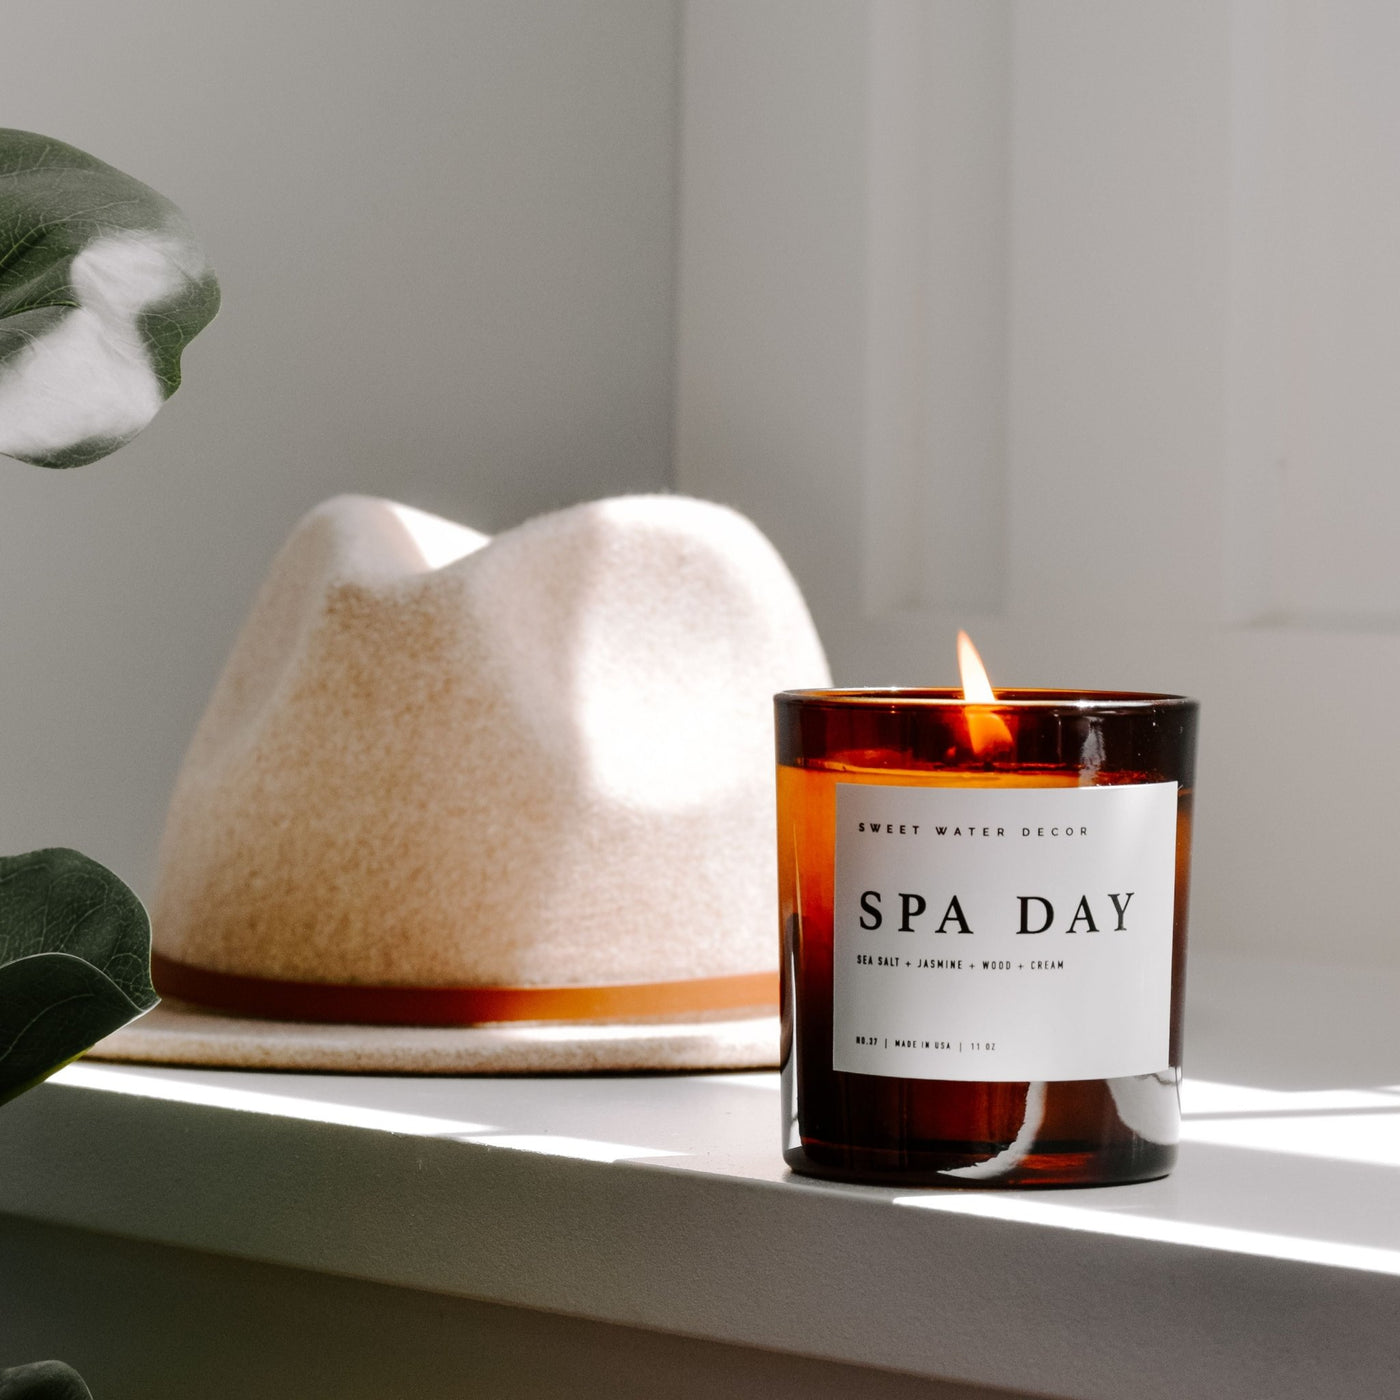 Spa Day Soy Candle - Amber Jar - 11 oz - Sweet Water Decor - Candles